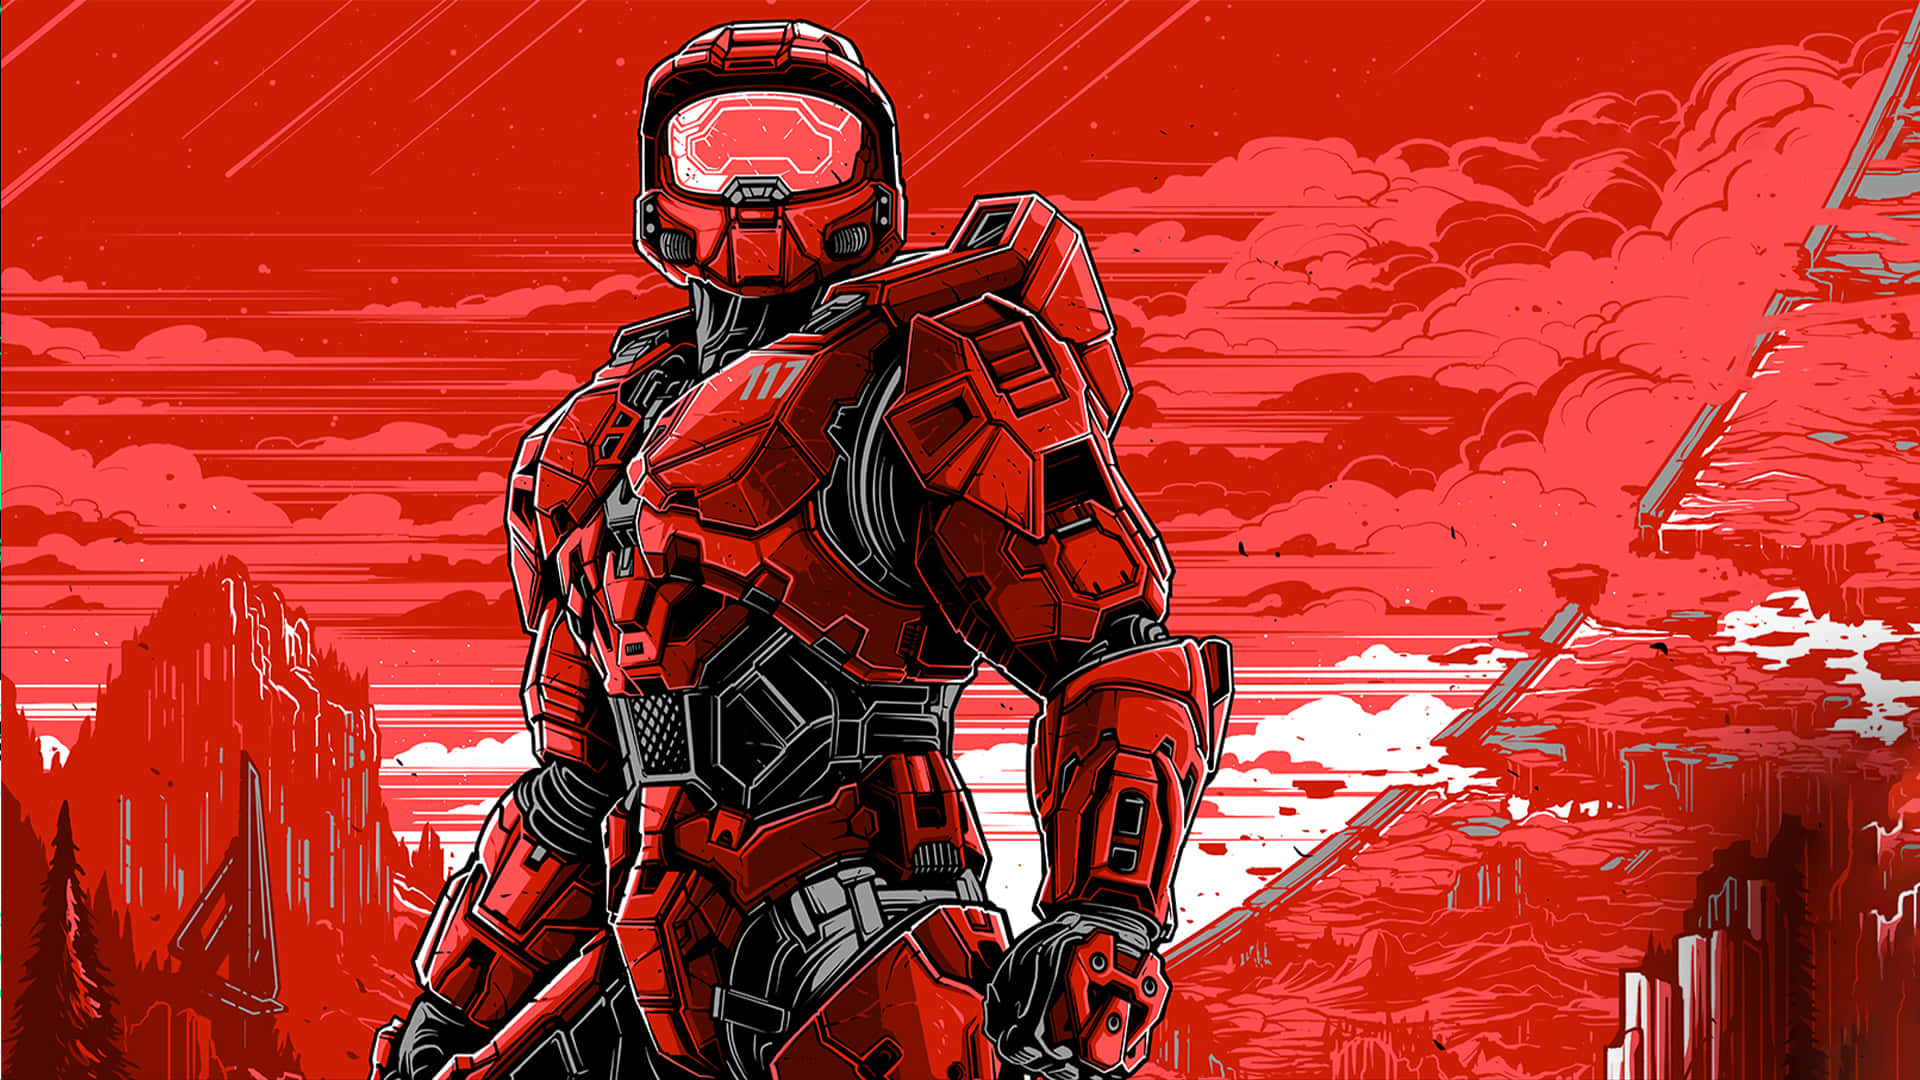 Cool Halo Red Master Chief Wallpaper